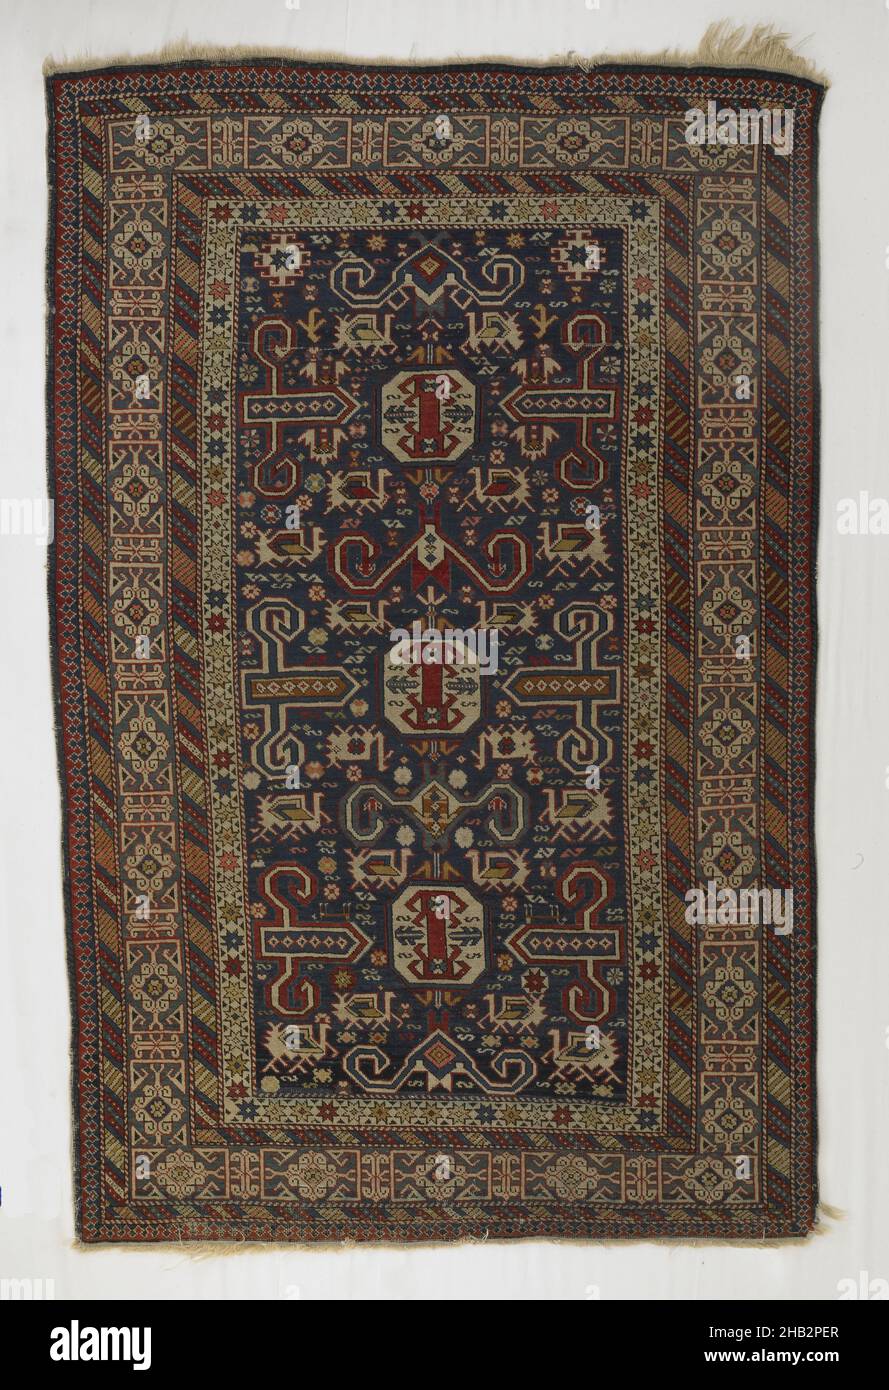 Small Shirvan Carpet with Kufesque Border and 'Perepedil' Pattern, Transcaucasian, late 19th century, Wool, Made in Caucasus, Azerbaijan, Asia, Coverings & hangings, textiles, 78 x 51 in. (198.1 x 129.5 cm Stock Photo